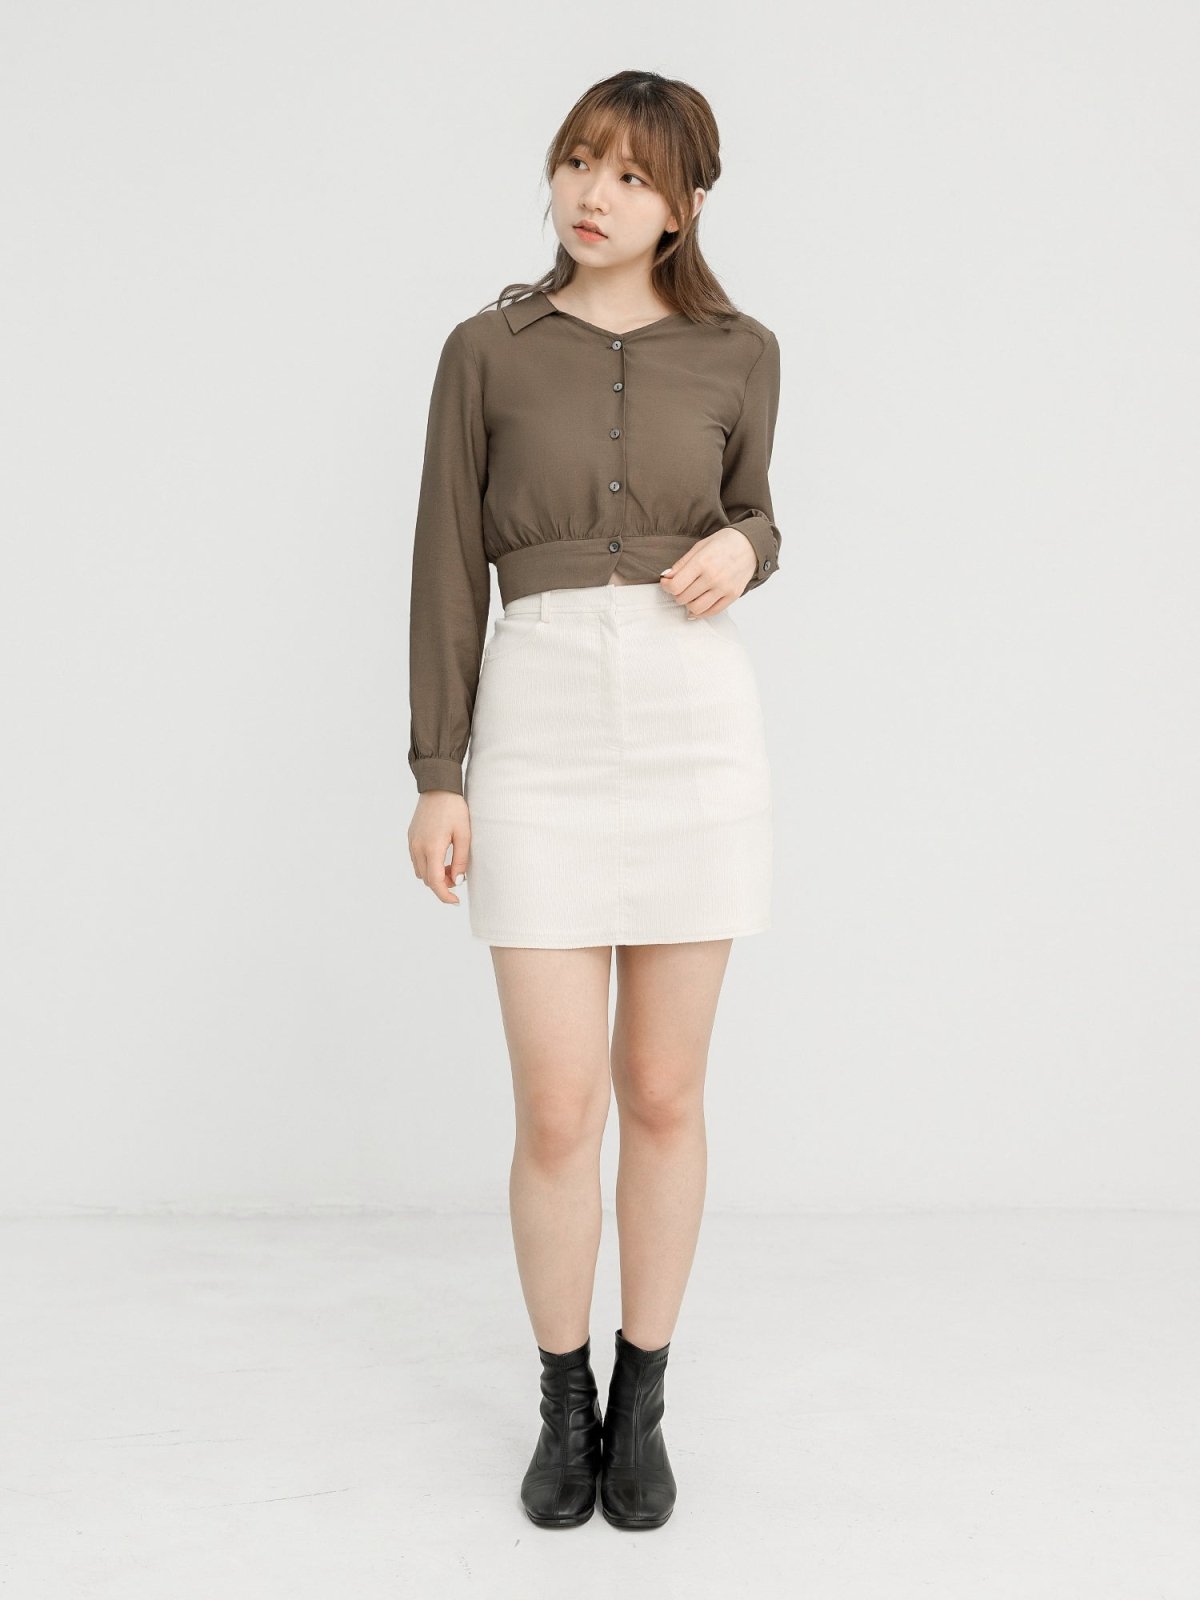 Avi Open Collar Cropped Shirt - DAG-DD1294-23BrownieS - Brownie - S - D'zage Designs